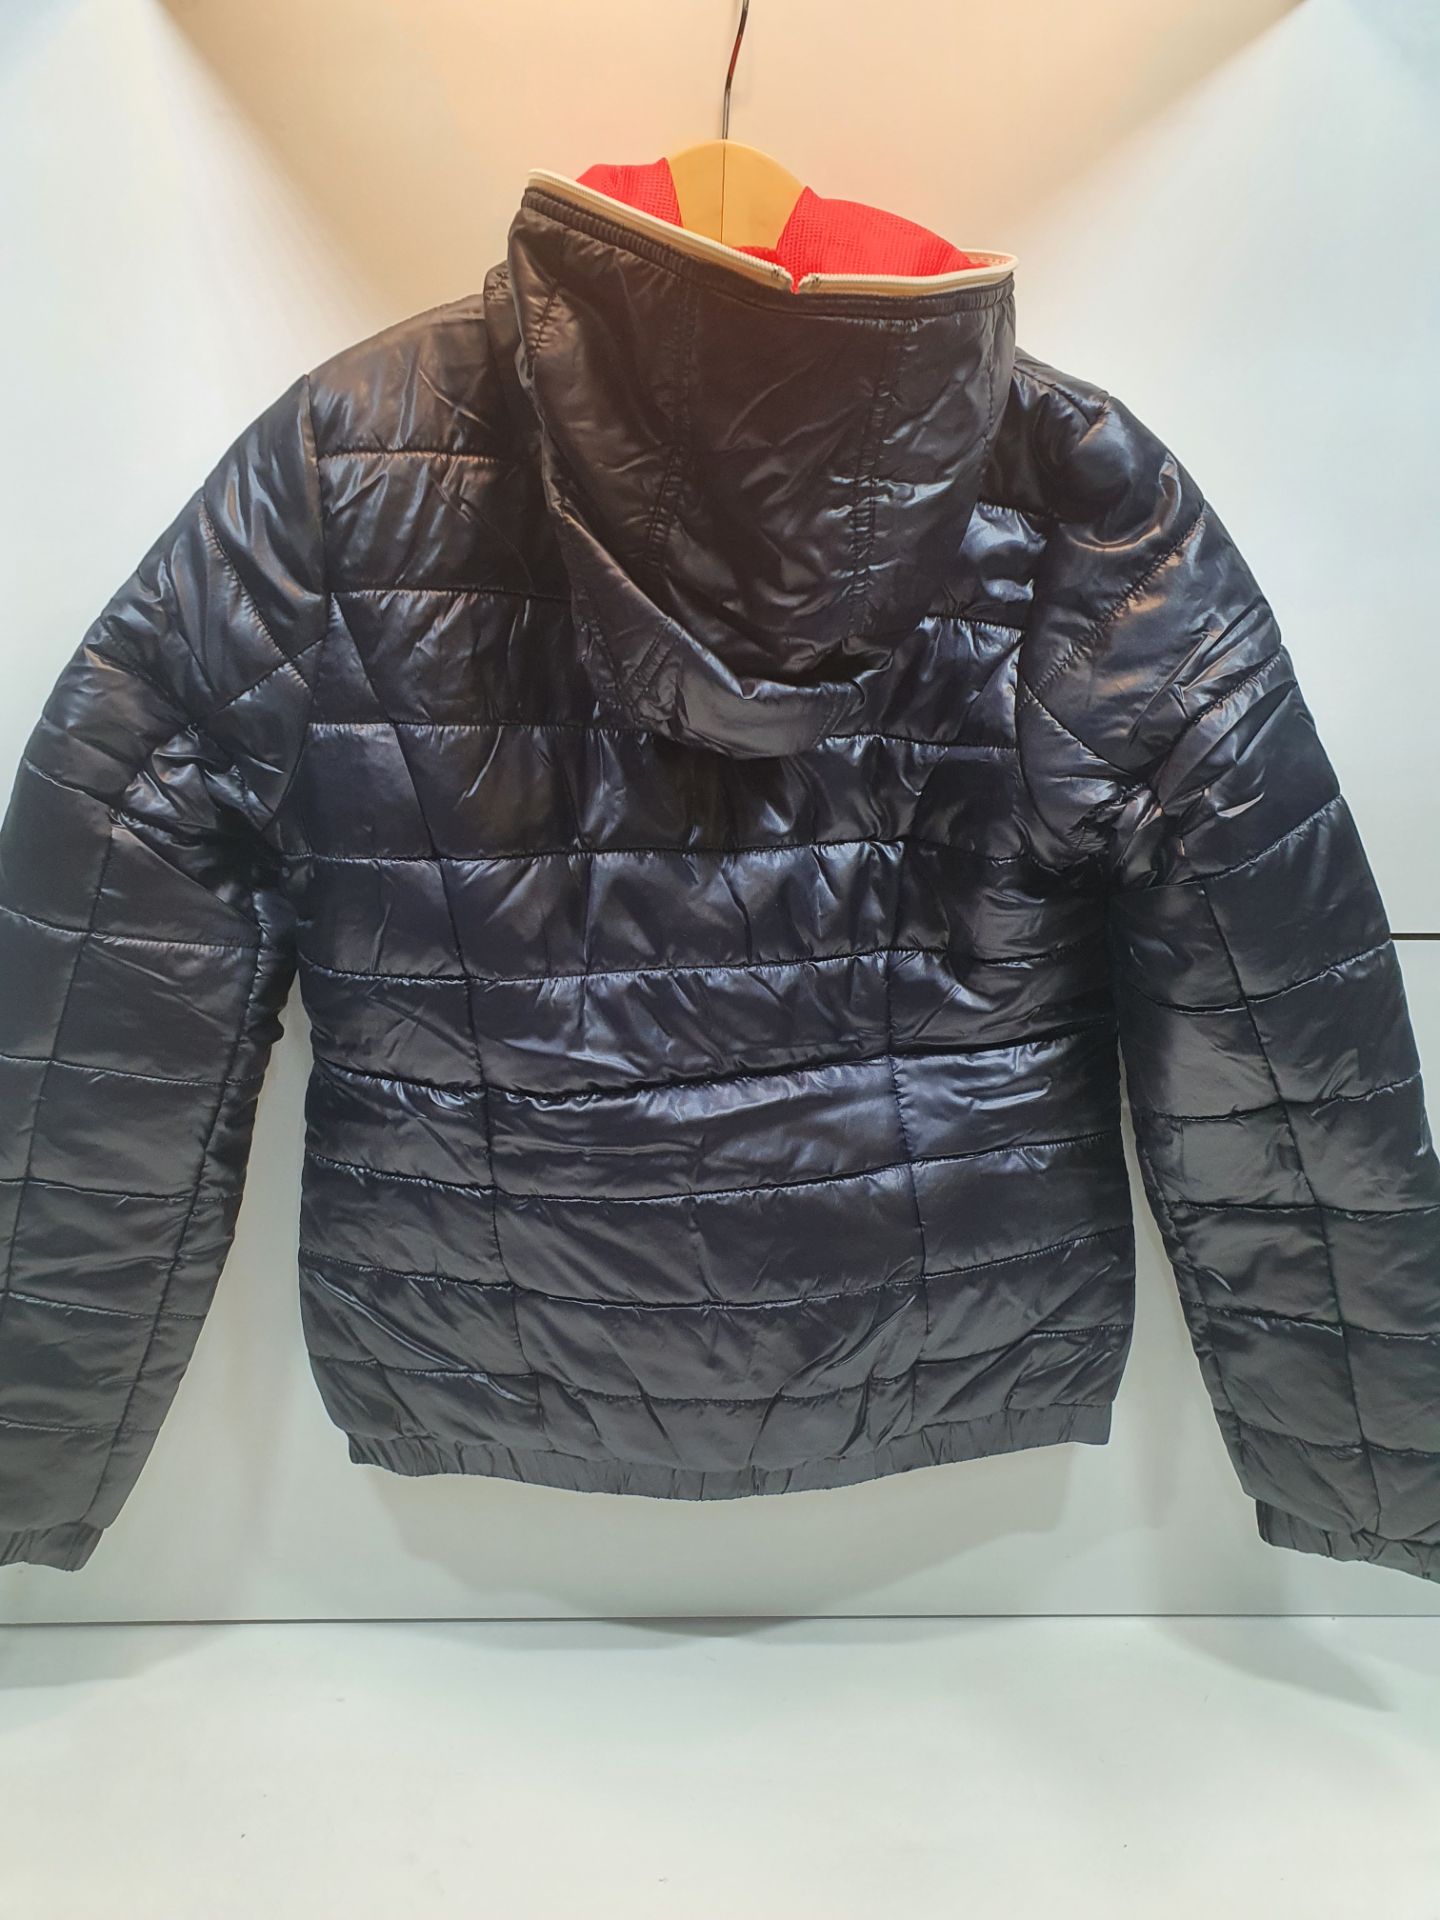 Blend of America Women's Quilted Style Jacket - Image 2 of 2